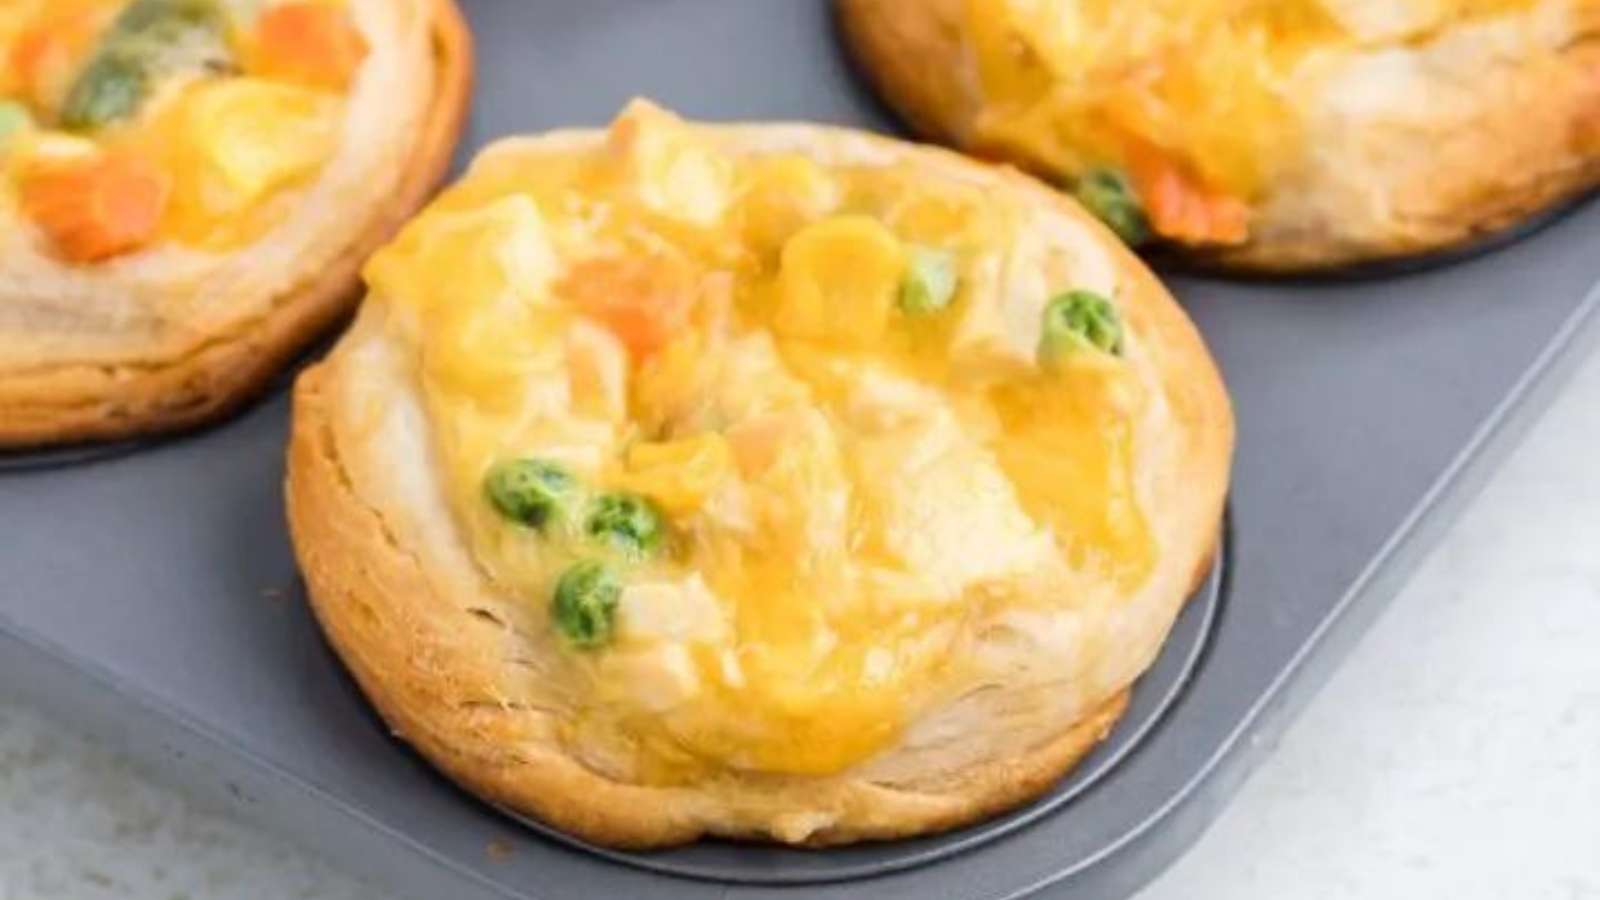 Chicken and vegetable pot pies in a muffin tin.